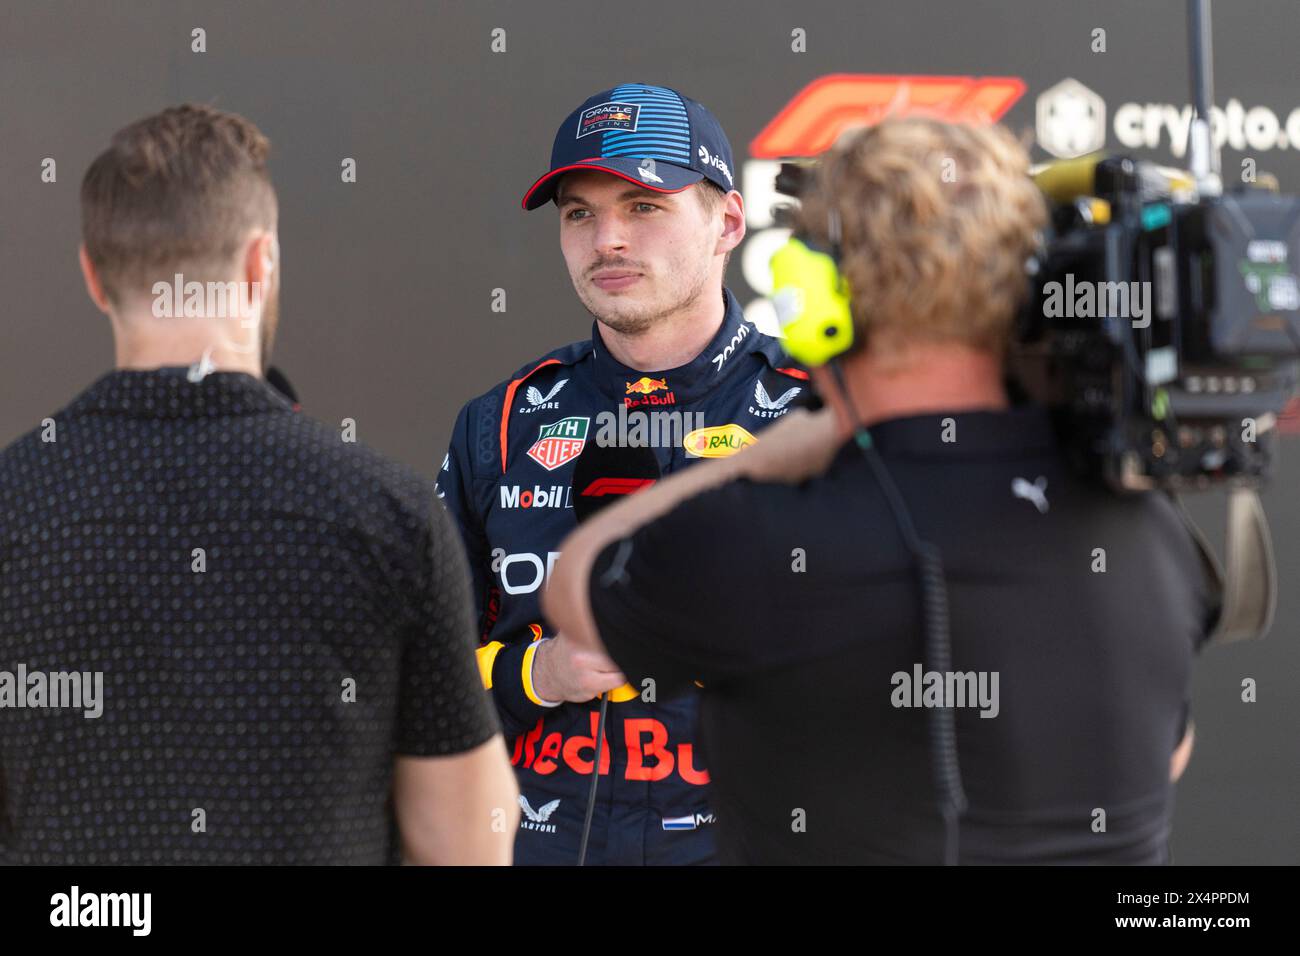 Miami Gardens, United States. 04th May, 2024. Dutch Formula One driver Max Verstappen of Red Bull Racing is interviewed following qualifying for the Formula One Miami Grand Prix at the Miami International Autodrome in Miami Gardens, Florida on Saturday, May 4, 2024 Photo by Greg Nash/UPI. Credit: UPI/Alamy Live News Stock Photo